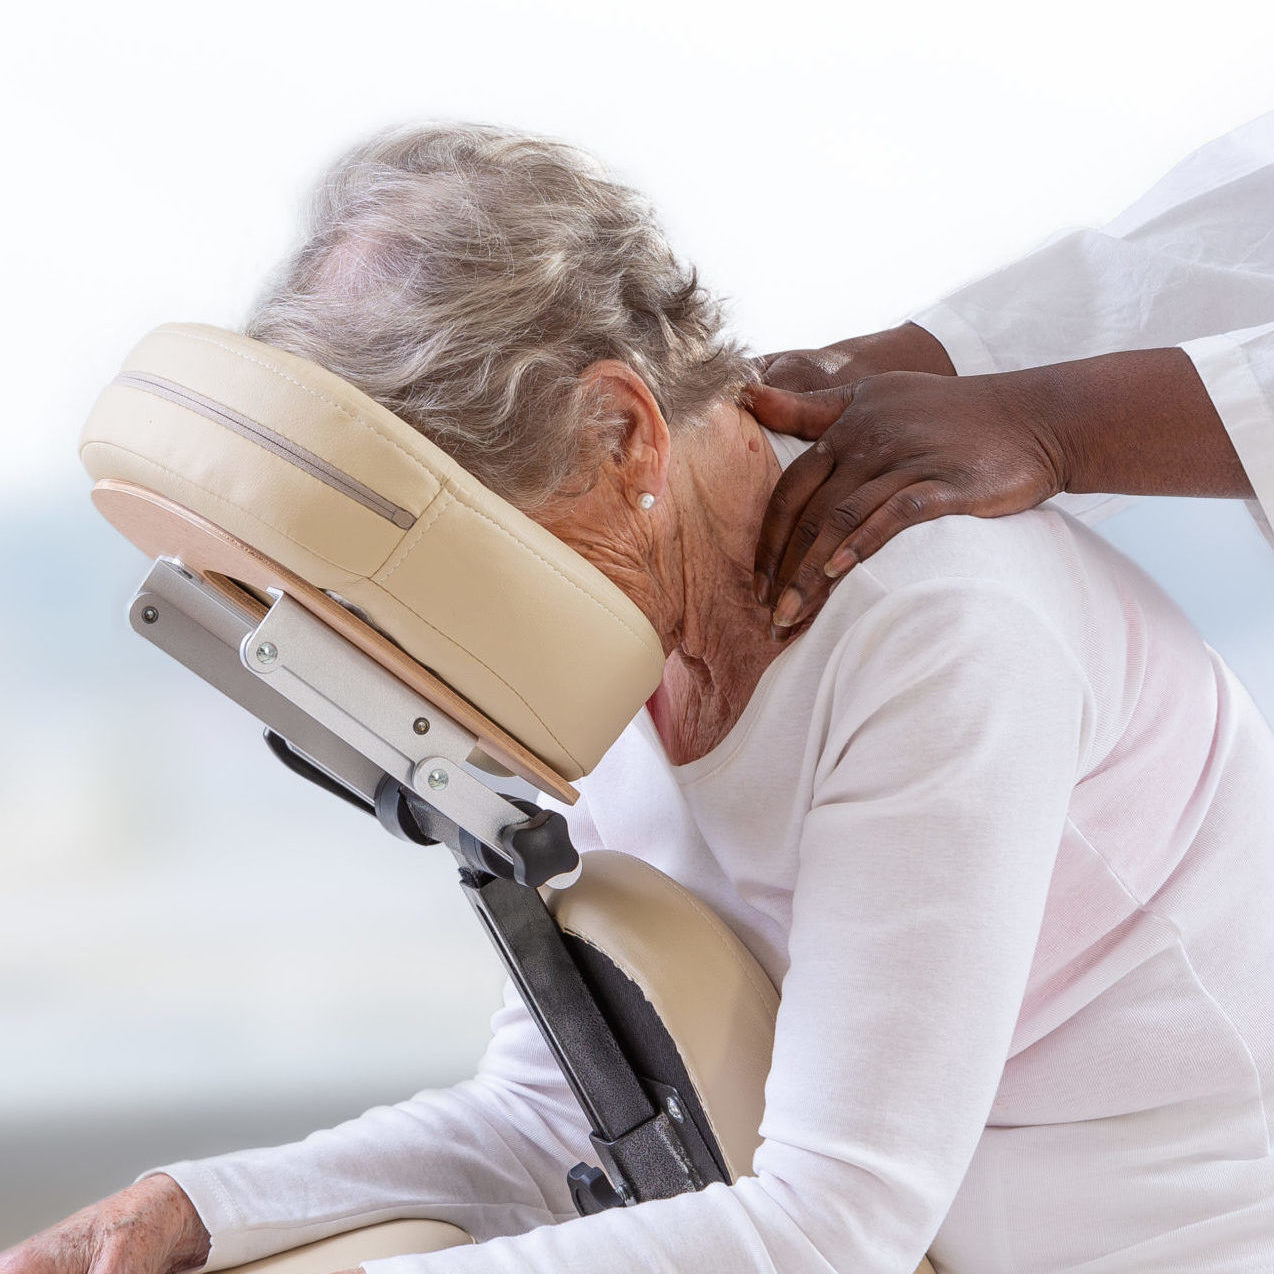 woman getting massage in chair. Calm, specialist